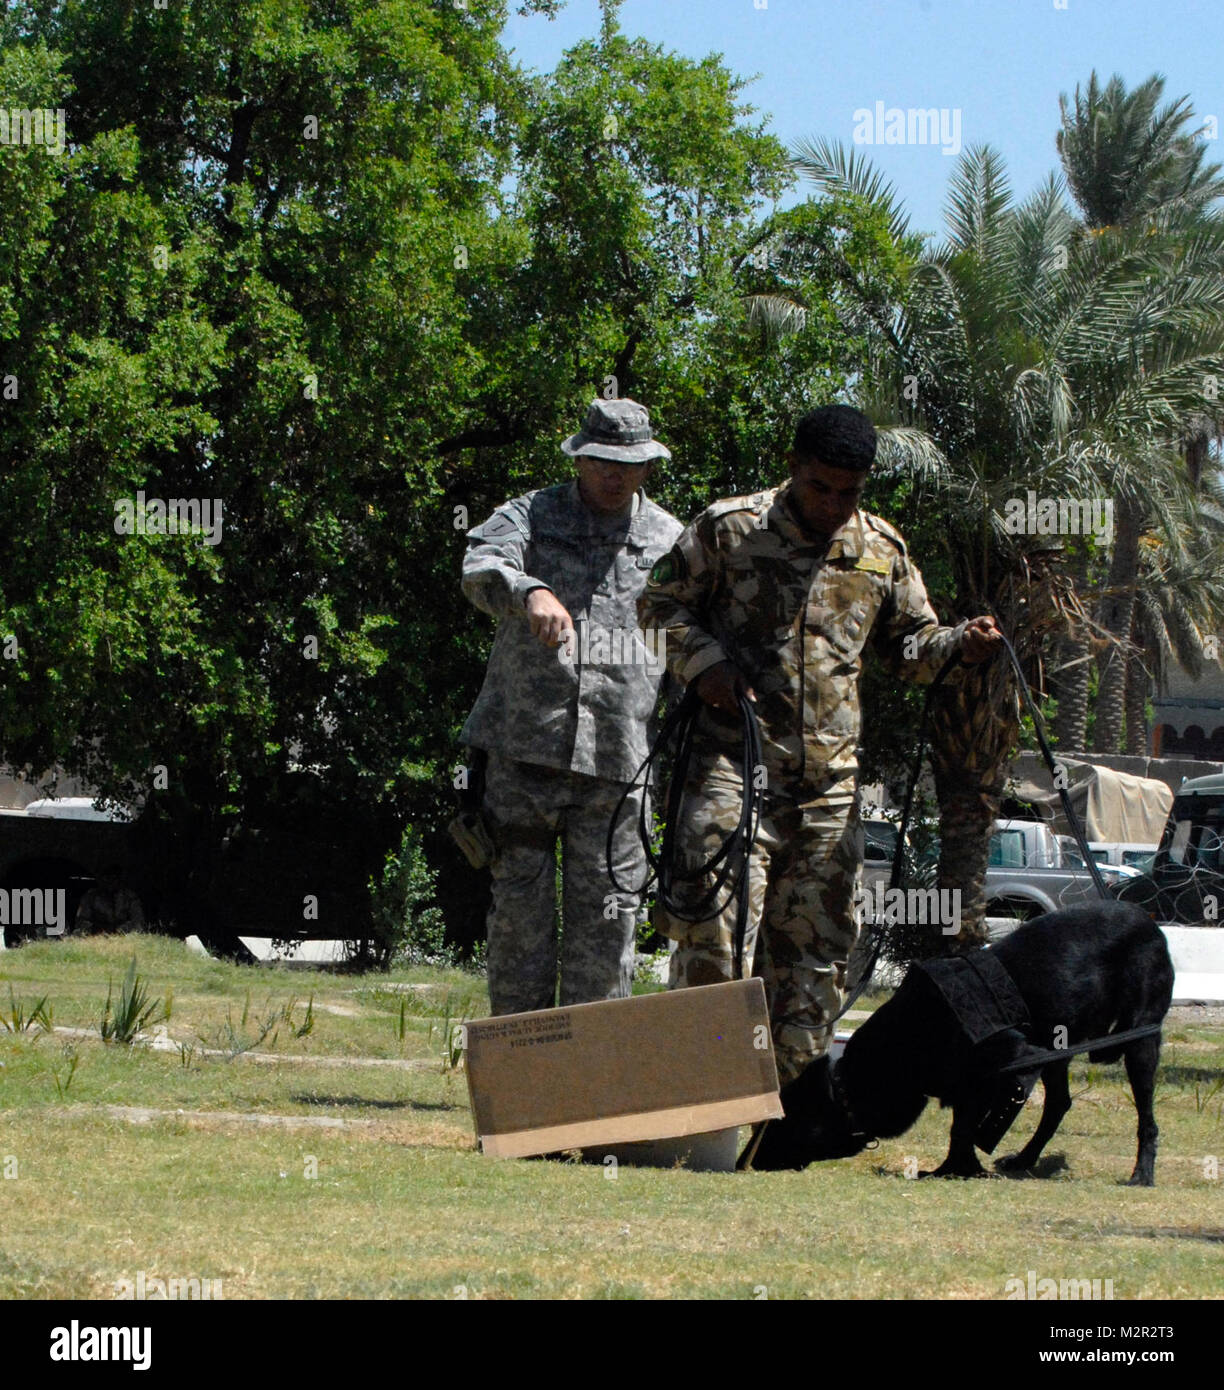 BAGHDAD—Sgt. 1st Class Earl C. Couture, left, an engineer with Company C, Special Troops Battalion, 2nd Advise and Assist Brigade, 1st Infantry Division, United States Division – Center and a Jay, Maine, native, and a handler with the 11th Iraqi Army Division watch as Joey, a black Labrador retriever working dog with the 11th IA Div., goes through a training exercise designed to test the dog’s ability to smell explosive materials Aug. 17 at Joint Security Station Old MoD, Iraq. Joey and three other working dogs were inherited by the 11th IA Div. from a contracting firm and are now being re-tra Stock Photo